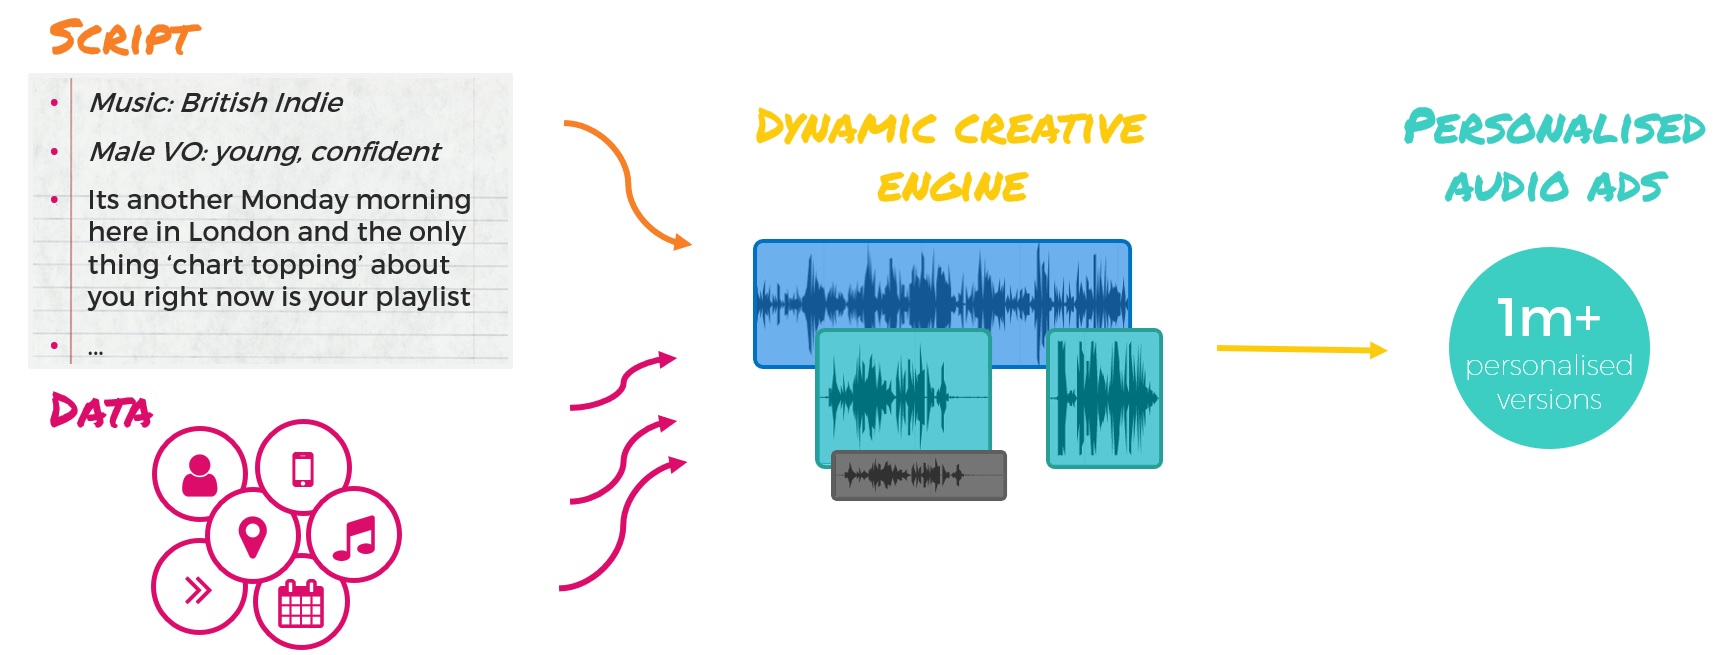 How to create dynamic audio ads